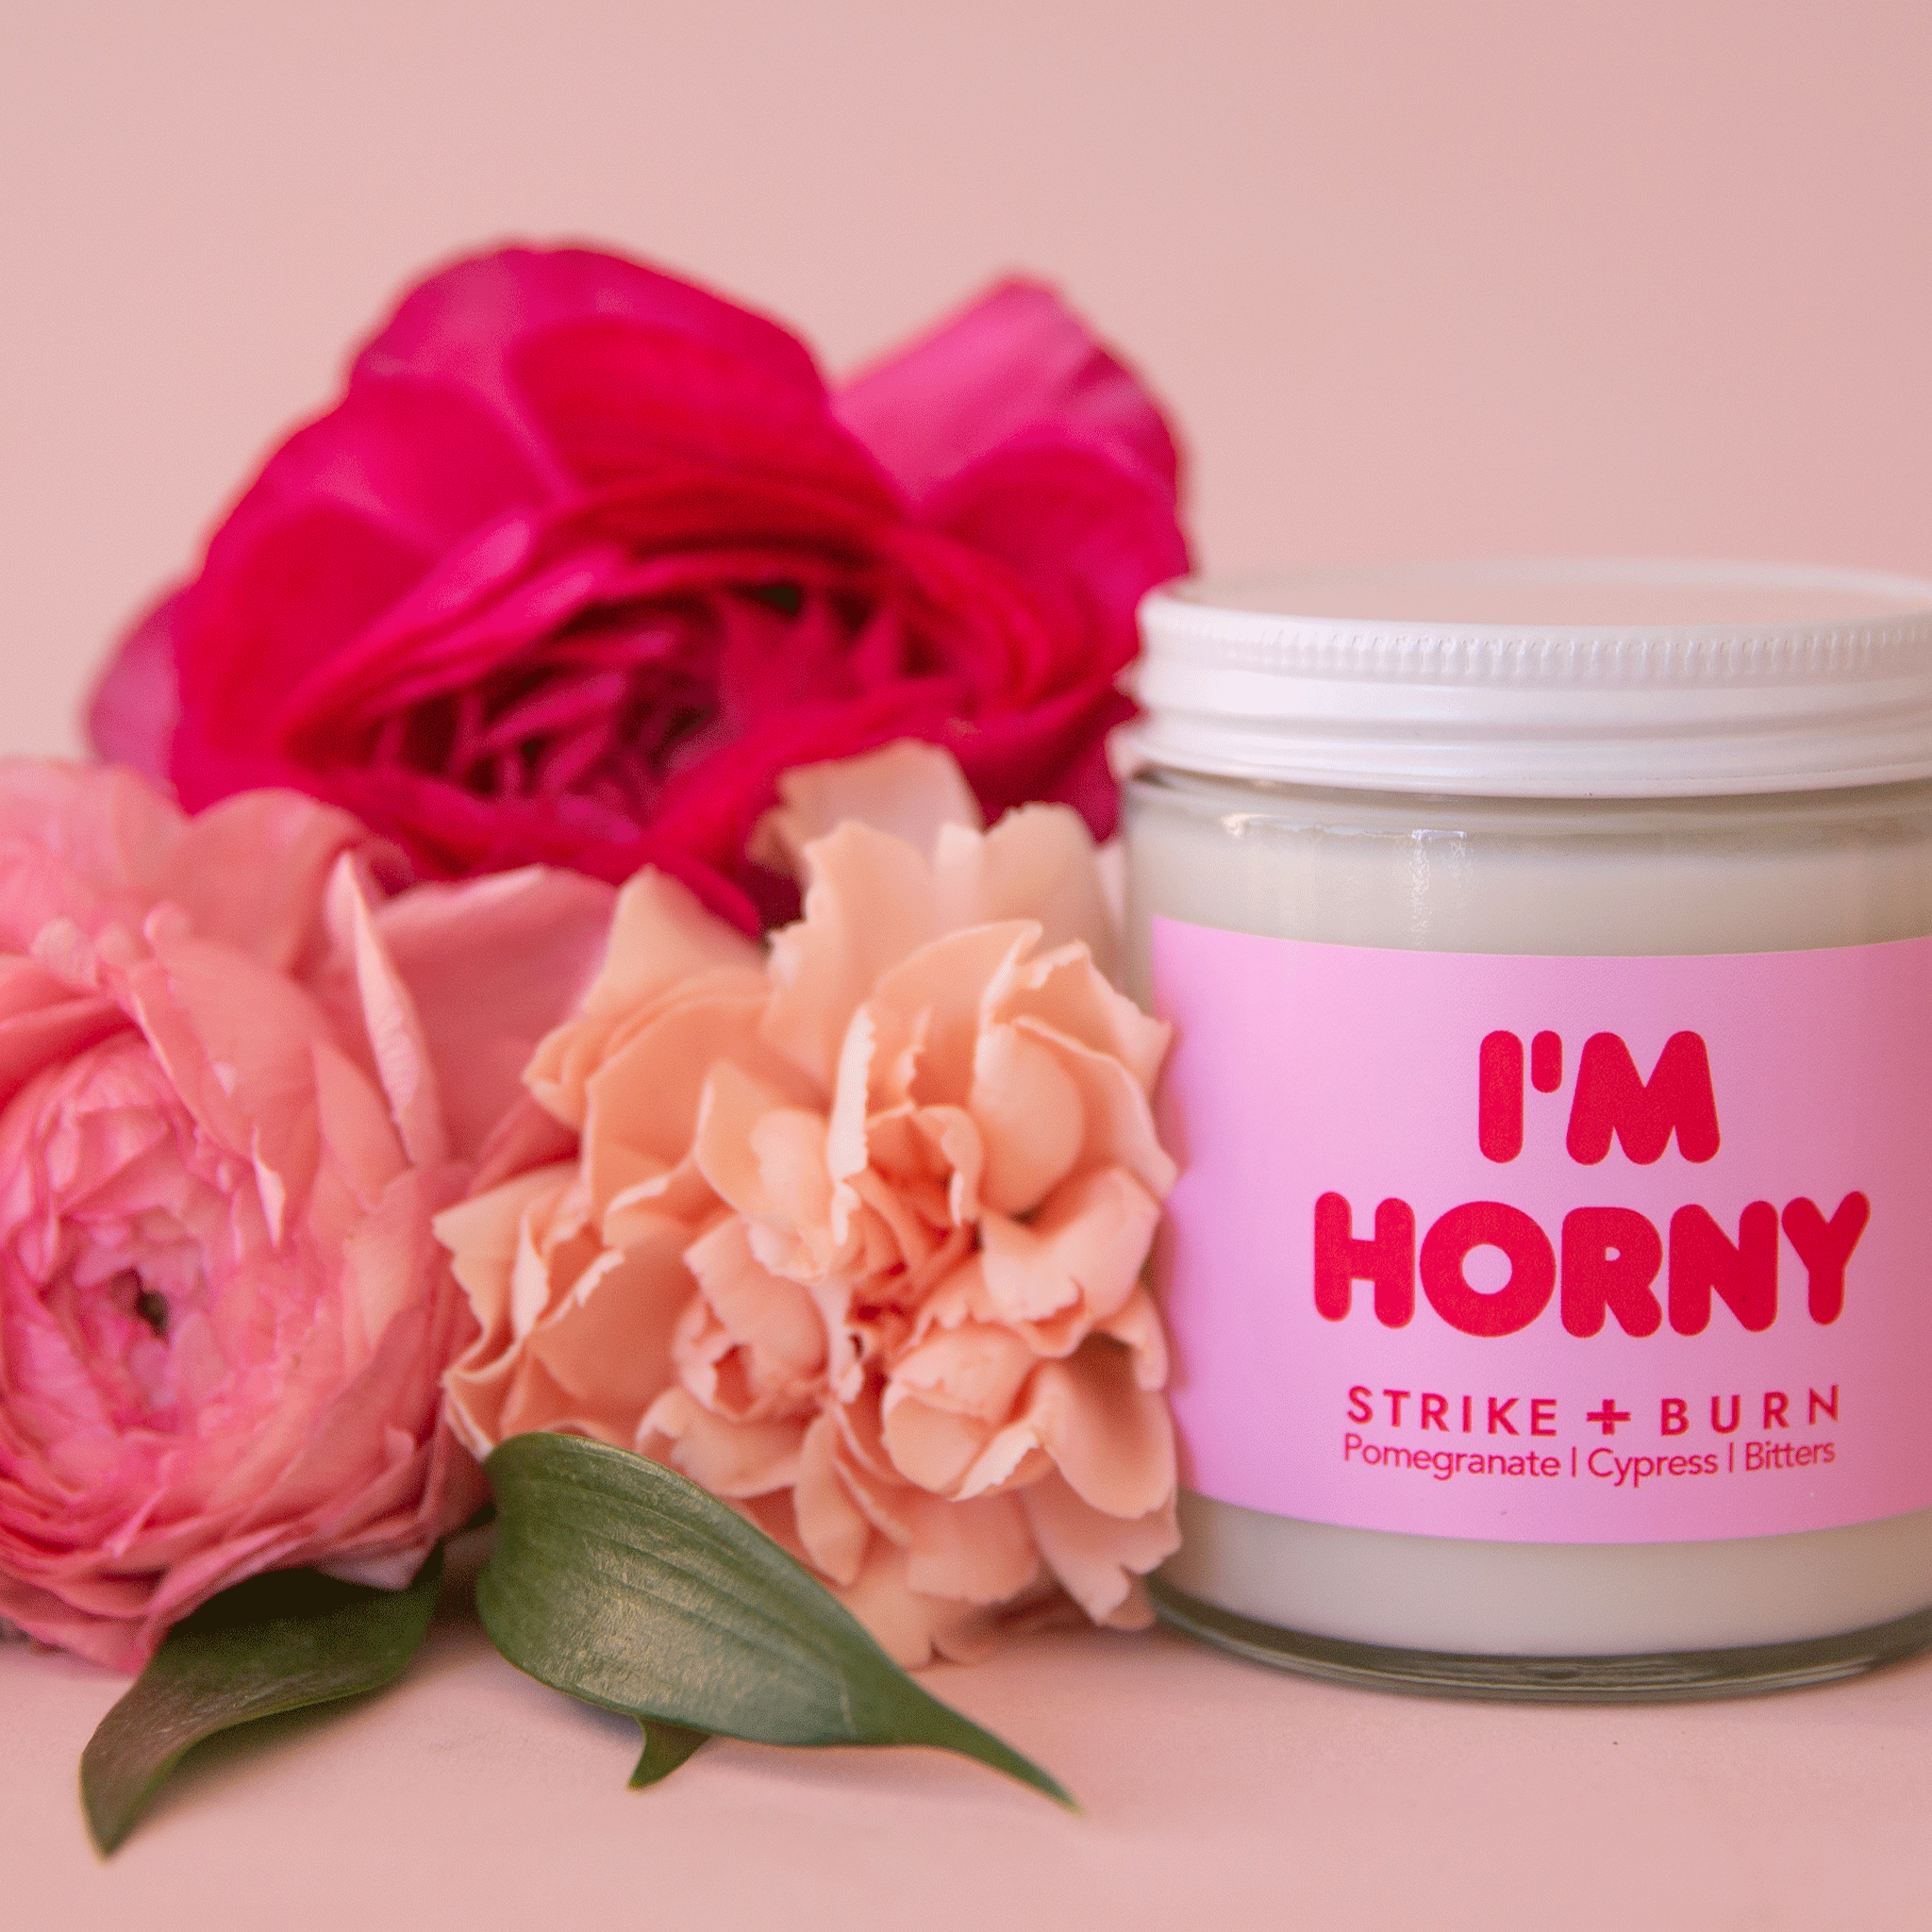 On a pink background is a glass candle jar with a pink and red label that reads, "I'm Horny".